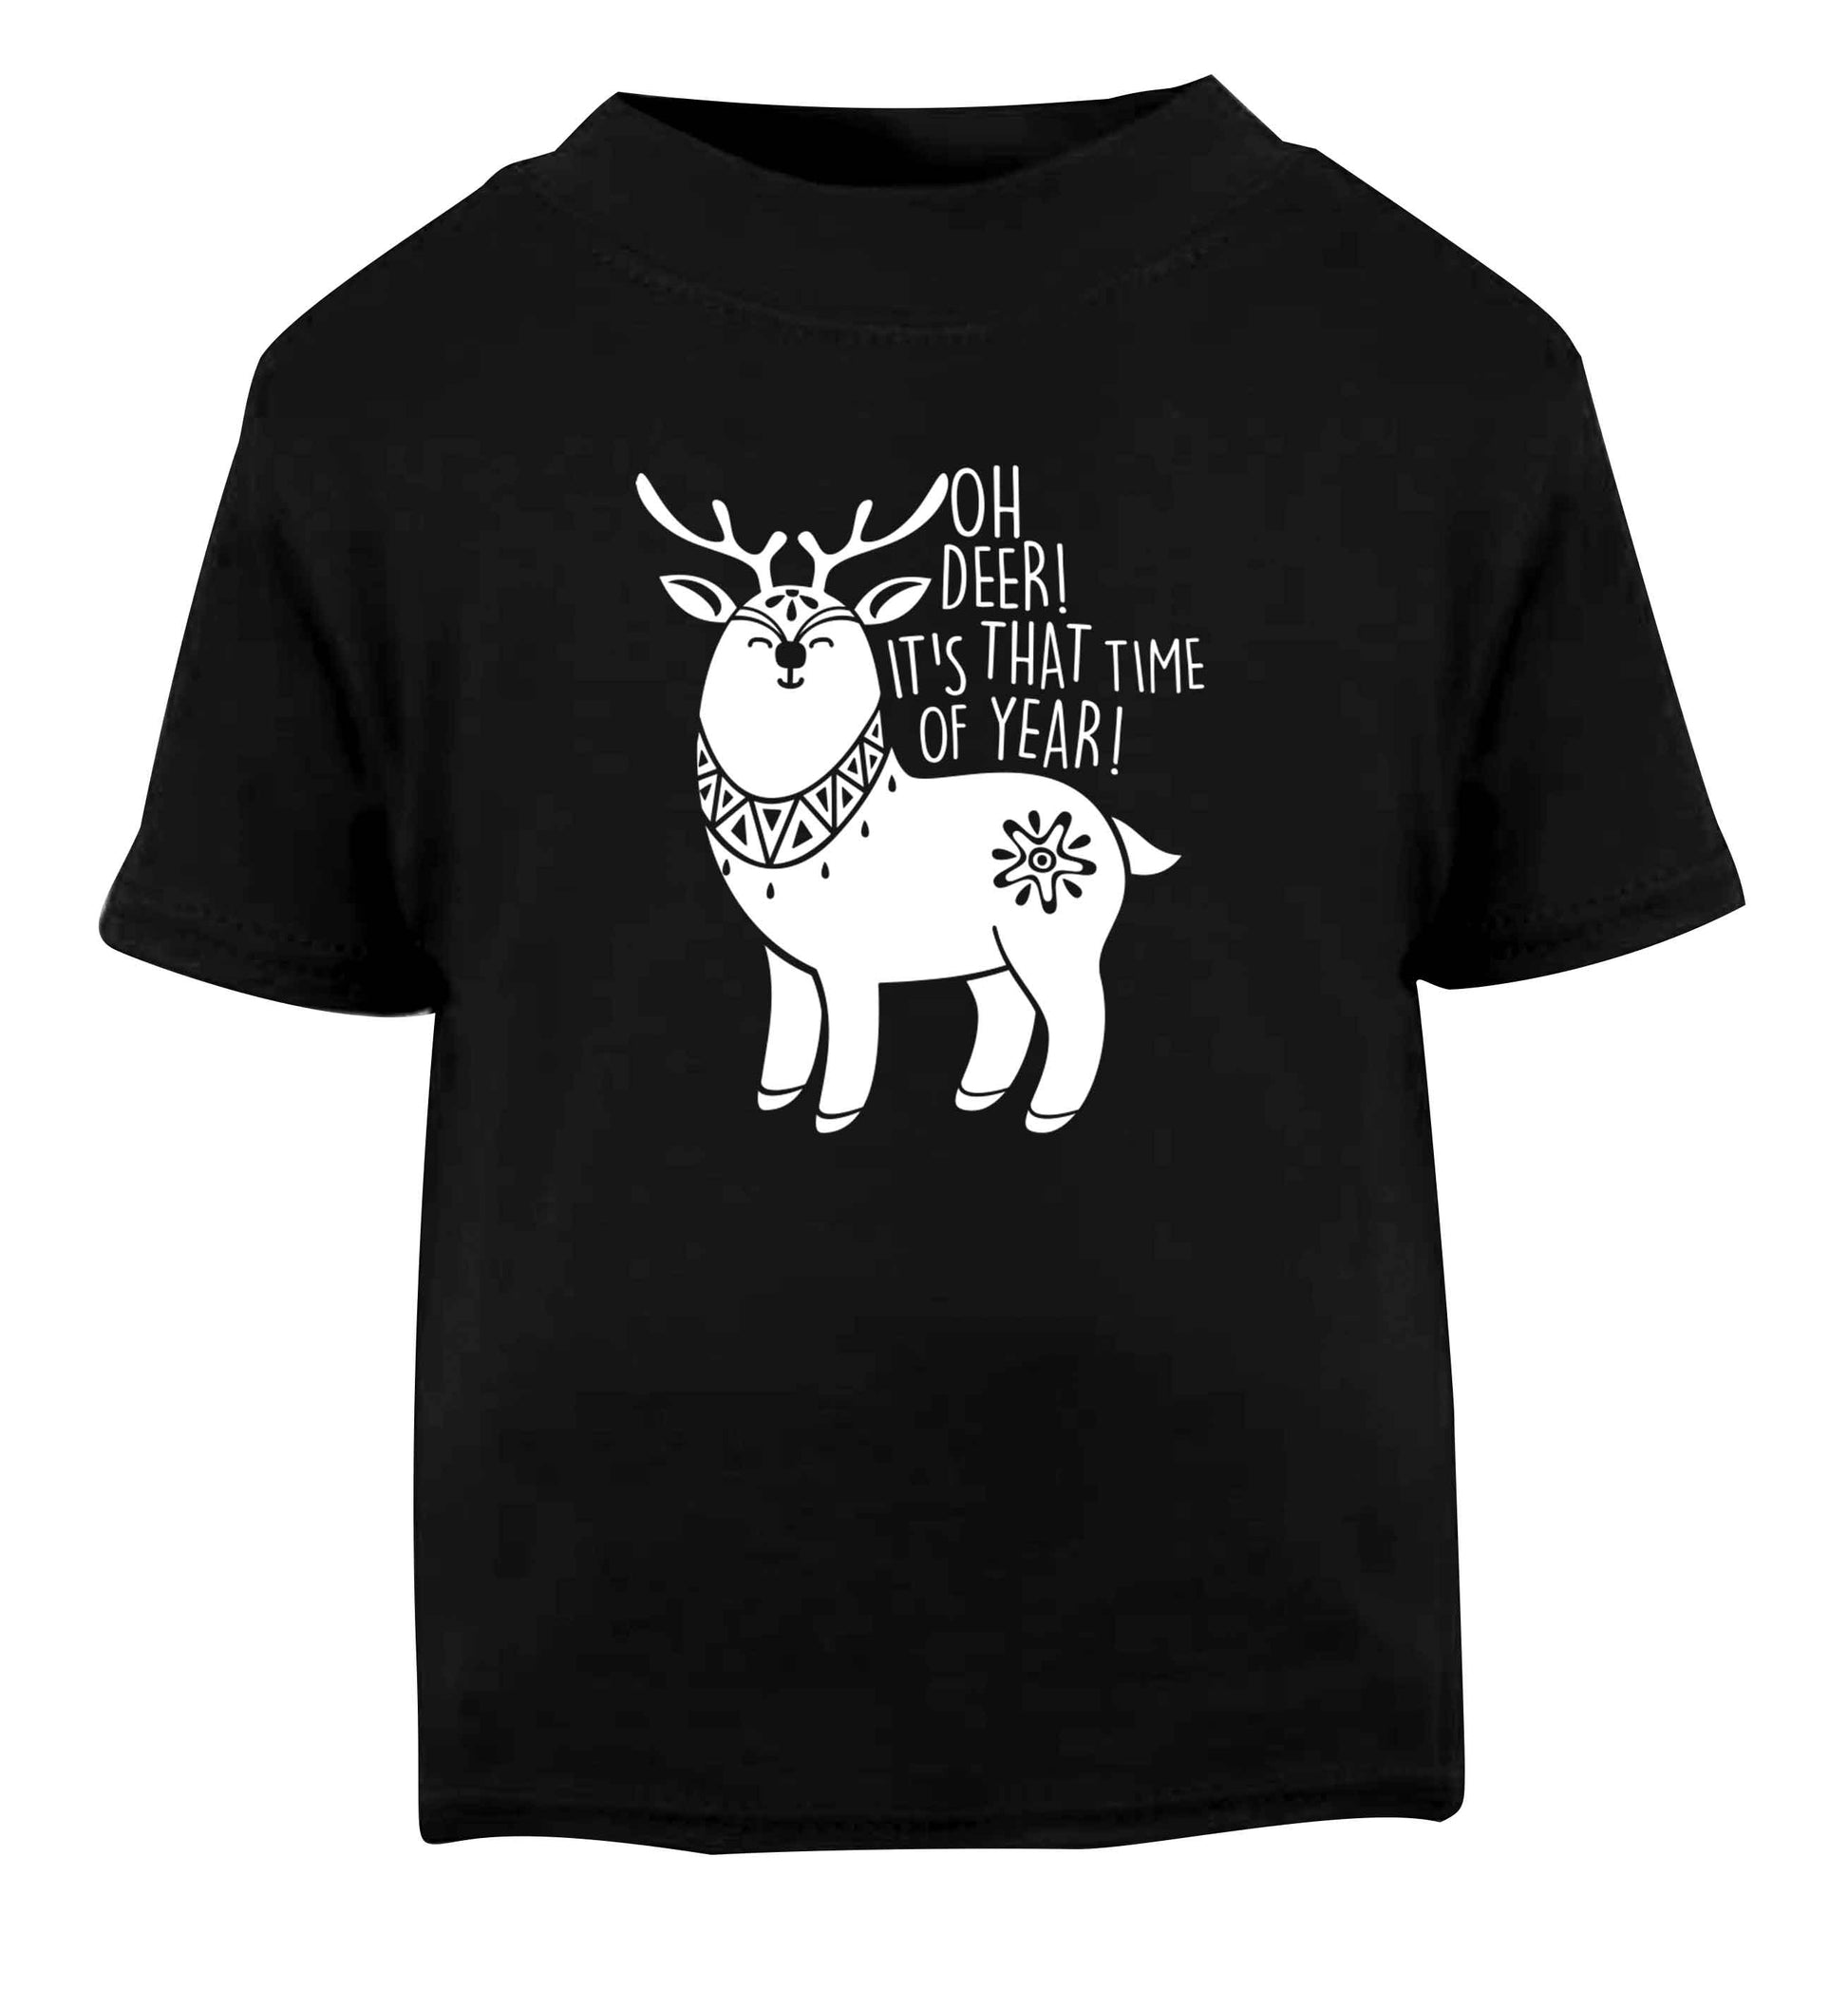 Oh dear it's that time of year Black Baby Toddler Tshirt 2 years